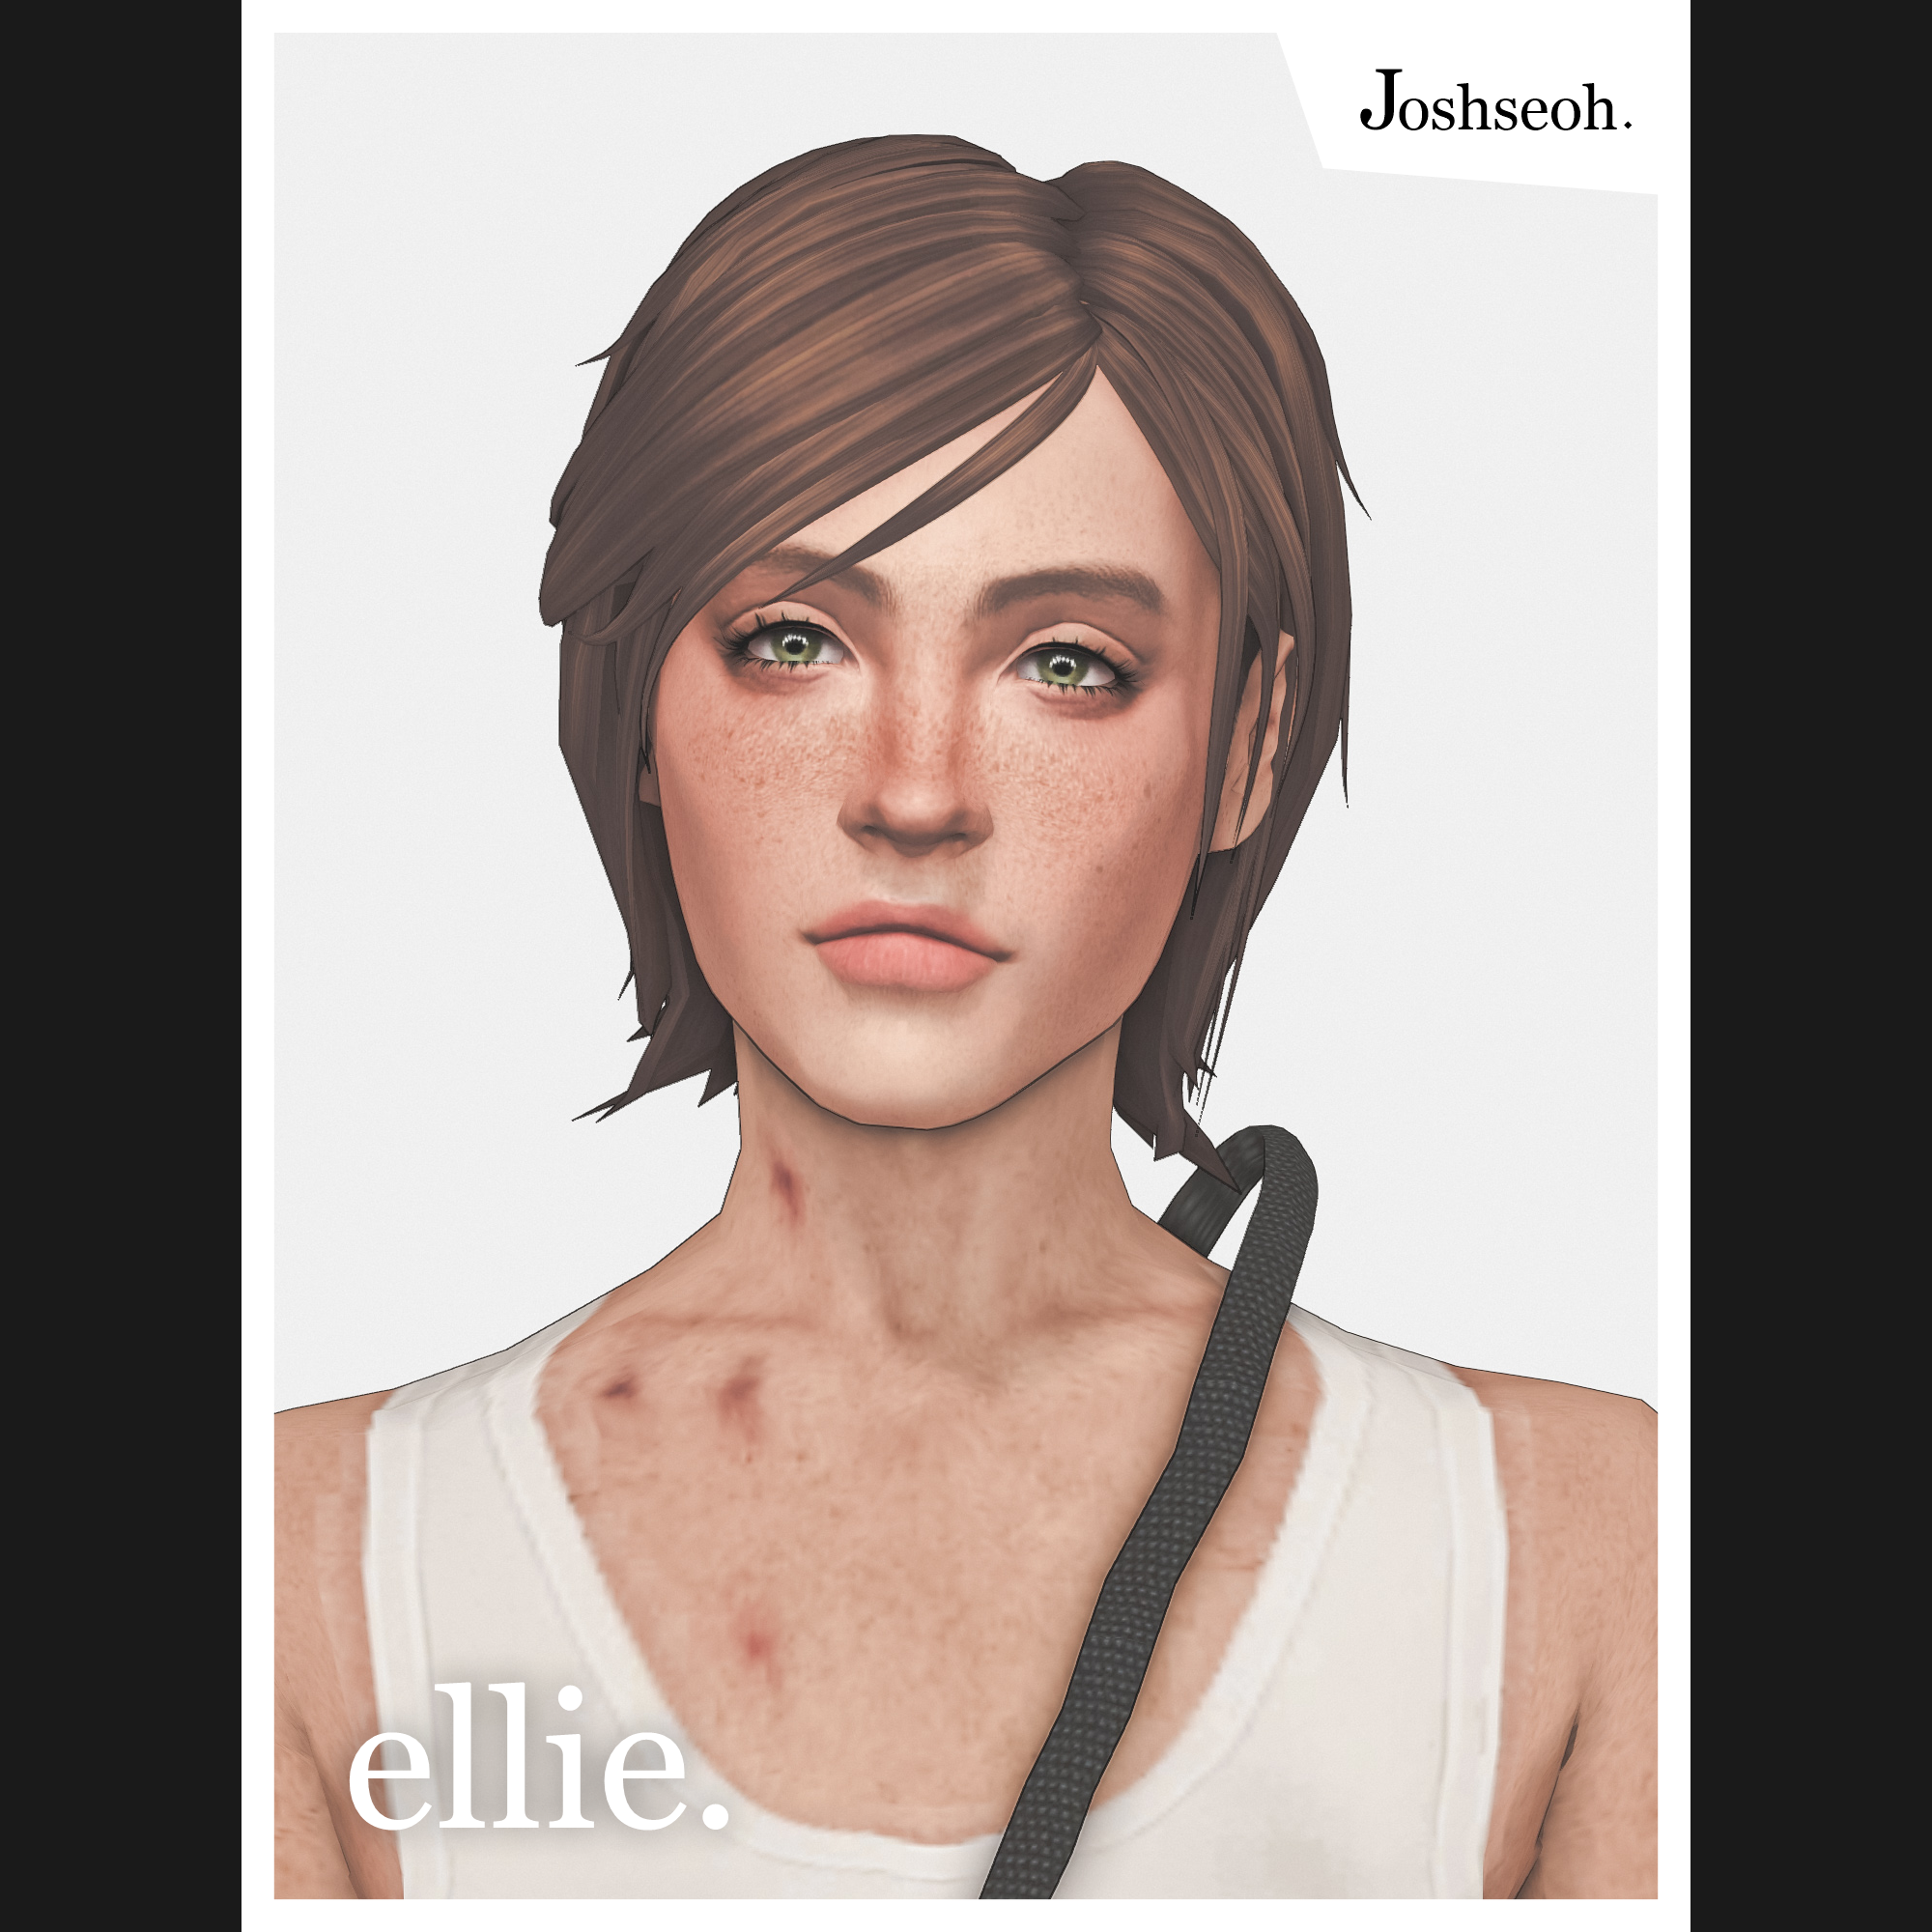 Mod The Sims - WCIF Hairstyle similar to Ellie's (TLOU)